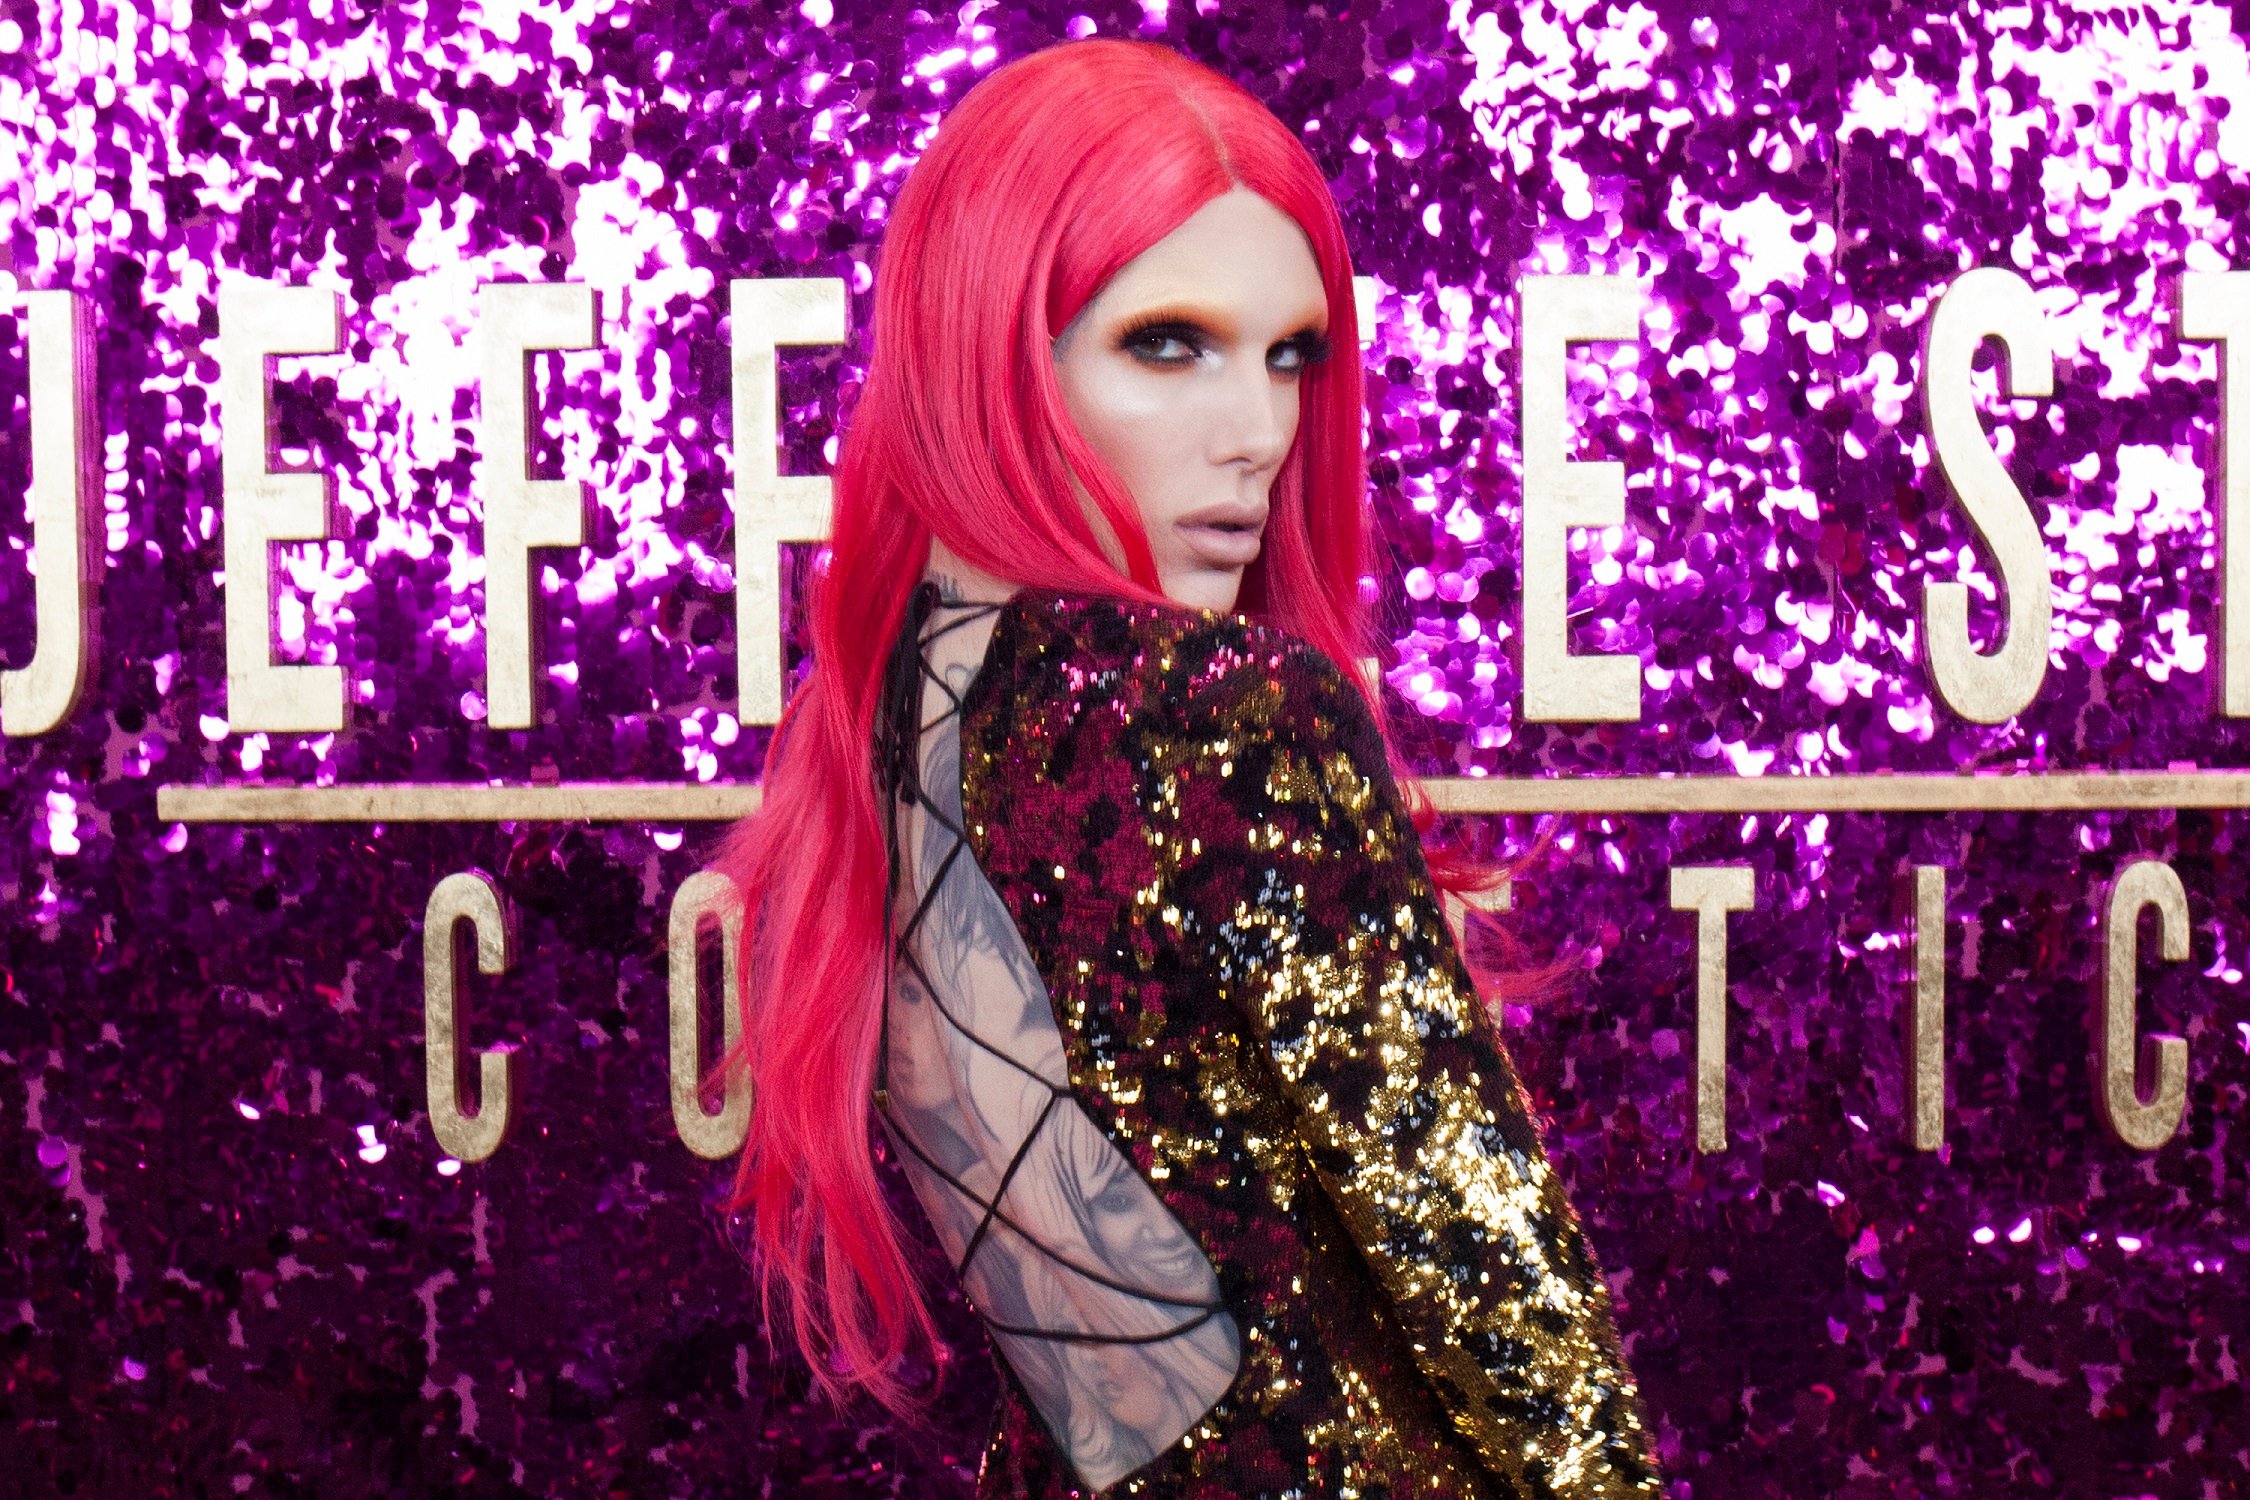 Jeffree Star attends the 3rd Annual RuPaul's DragCon at Los Angeles Convention Center